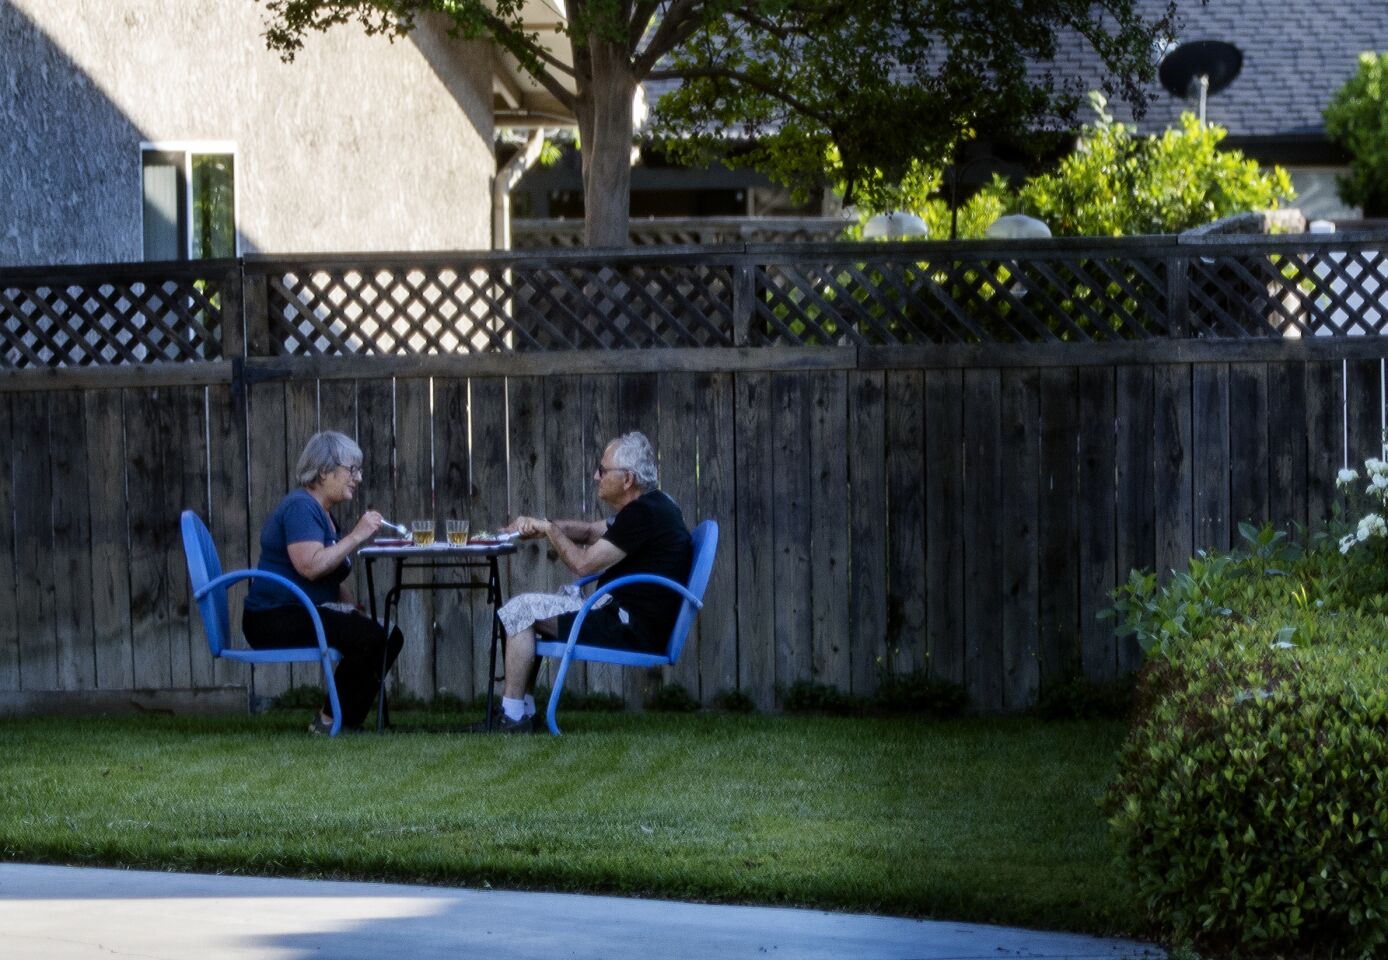 RIVERSIDE, CALIFORNIA - APRIL 27, 2020: Norm and Tracy Kahn enjoy eating dinner outside on a small cafe table sitting in blue chairs on their side yard during the coronavirus pandemic on April 27, 2020 in Riverside, California. 'During this pandemic, eating outside offers us an opportunity to change surrounding and appreciate the calmness of being outdoors among trees, scents from nature and the sounds of birds, " she said. Also adding, "Mixing up where we eat puts variety into our days and takes away the sameness of feeling trapped at home." (Gina Ferazzi/Los Angeles Times)